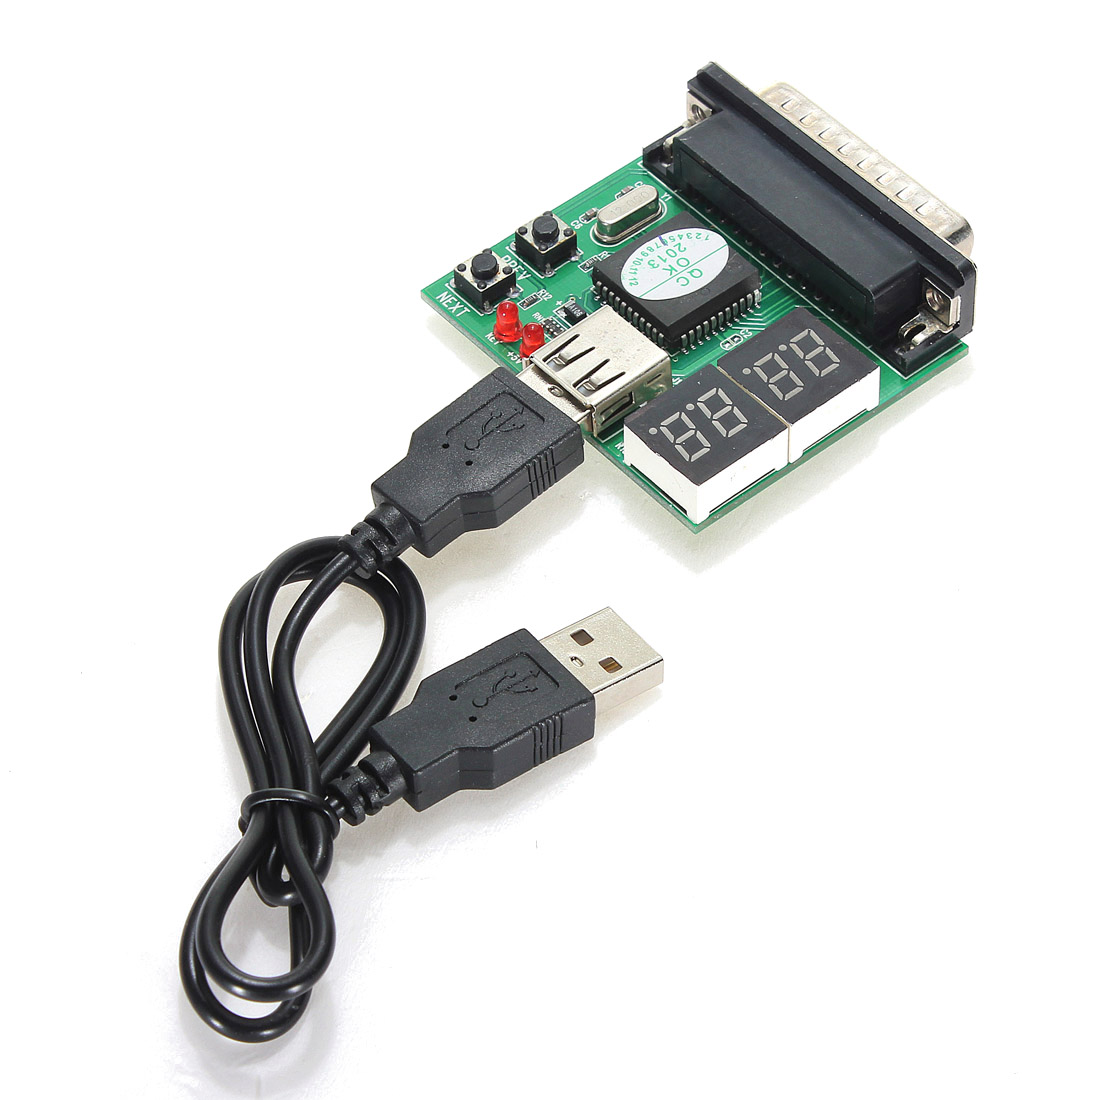 3pcs-Computer-Accessories-PC-Diagnostic-Card-USB-Post-Card-Motherboard-Analyzer-Tester-for-Notebook--1550785